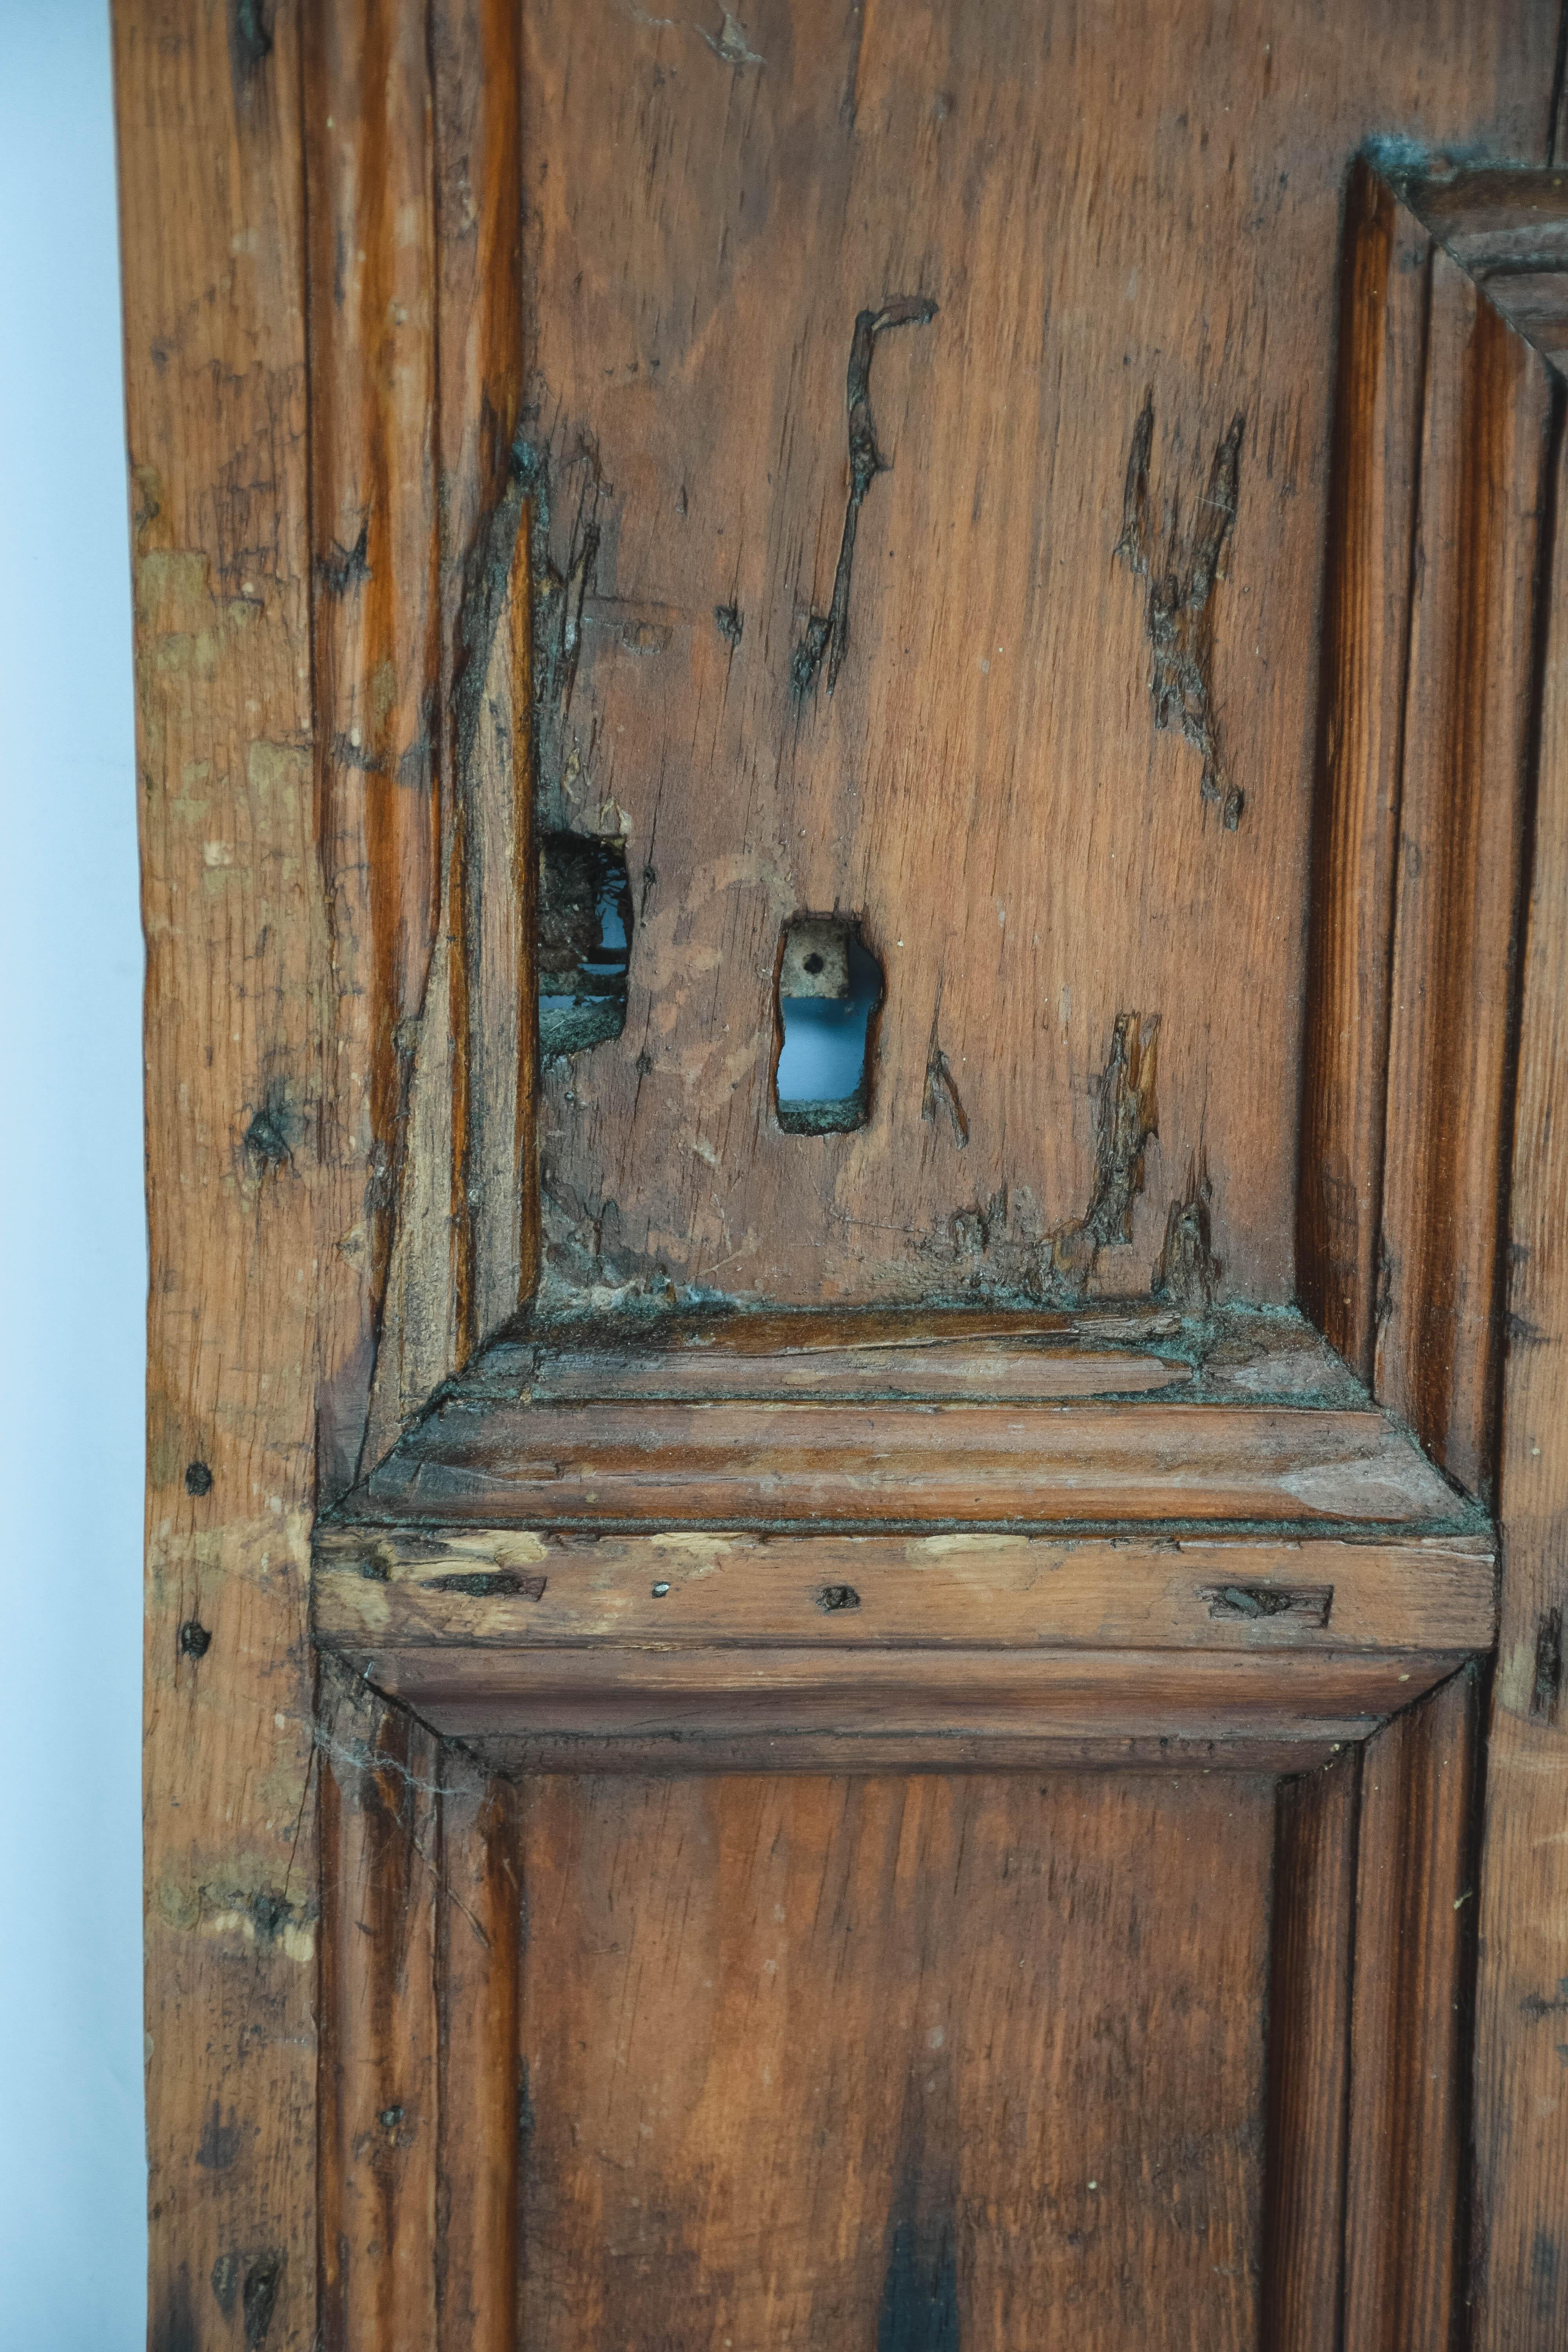 This is a French door form the 19th century. Strong and sturdy the door features hand forged iron hinges and the remnants of a lock. A wonderful piece to use in your home as a cabinet door or simply lean against a wall as a piece of art.